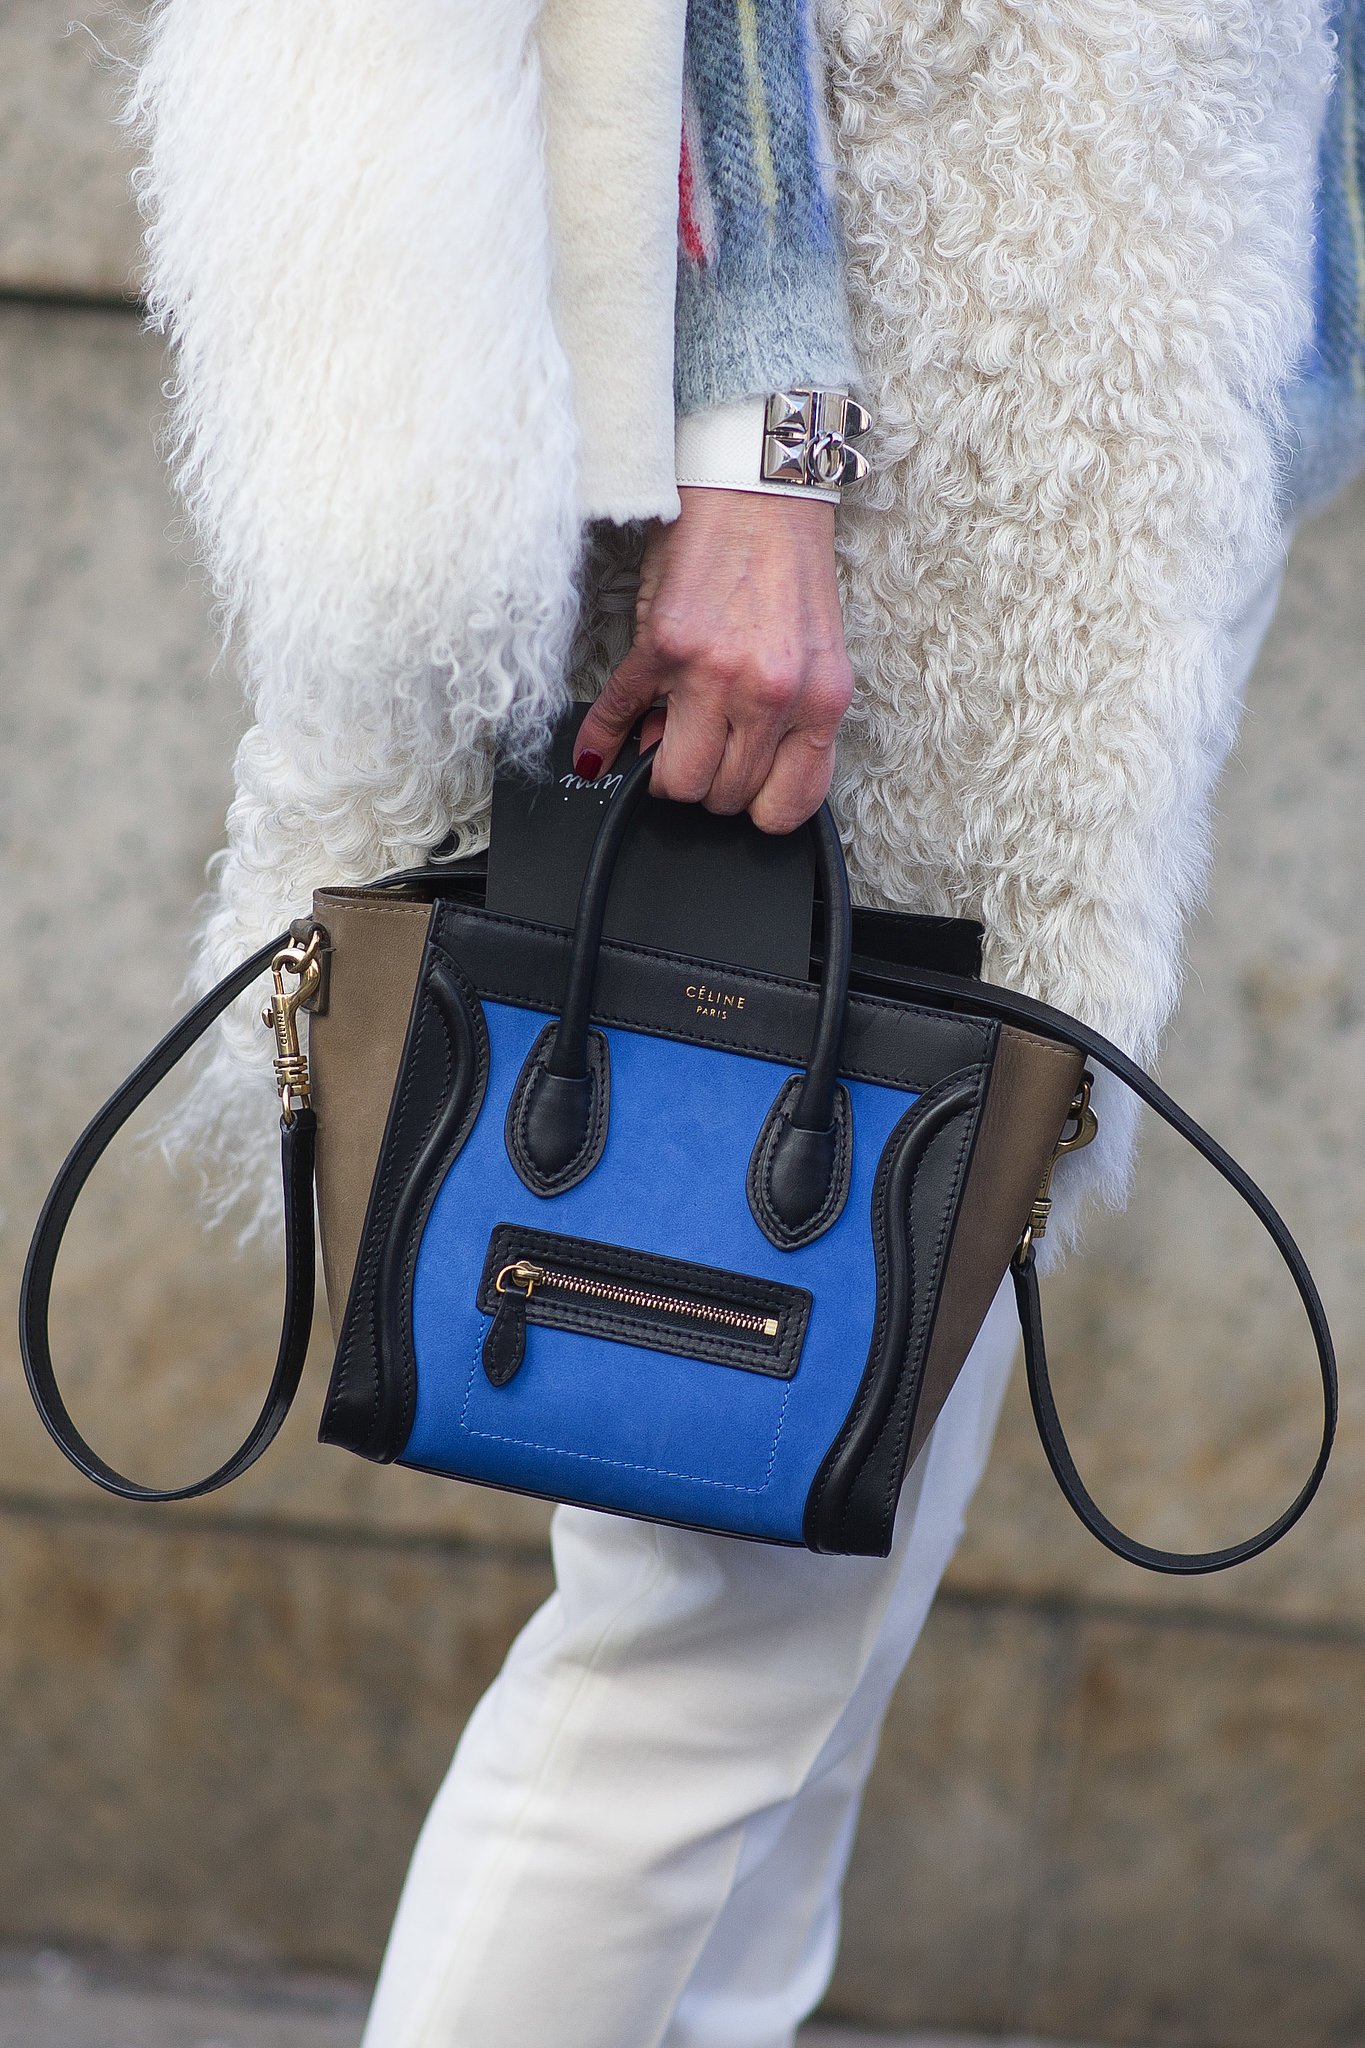 More proof that Céline might just be the official bag of the fashion crowd. 
